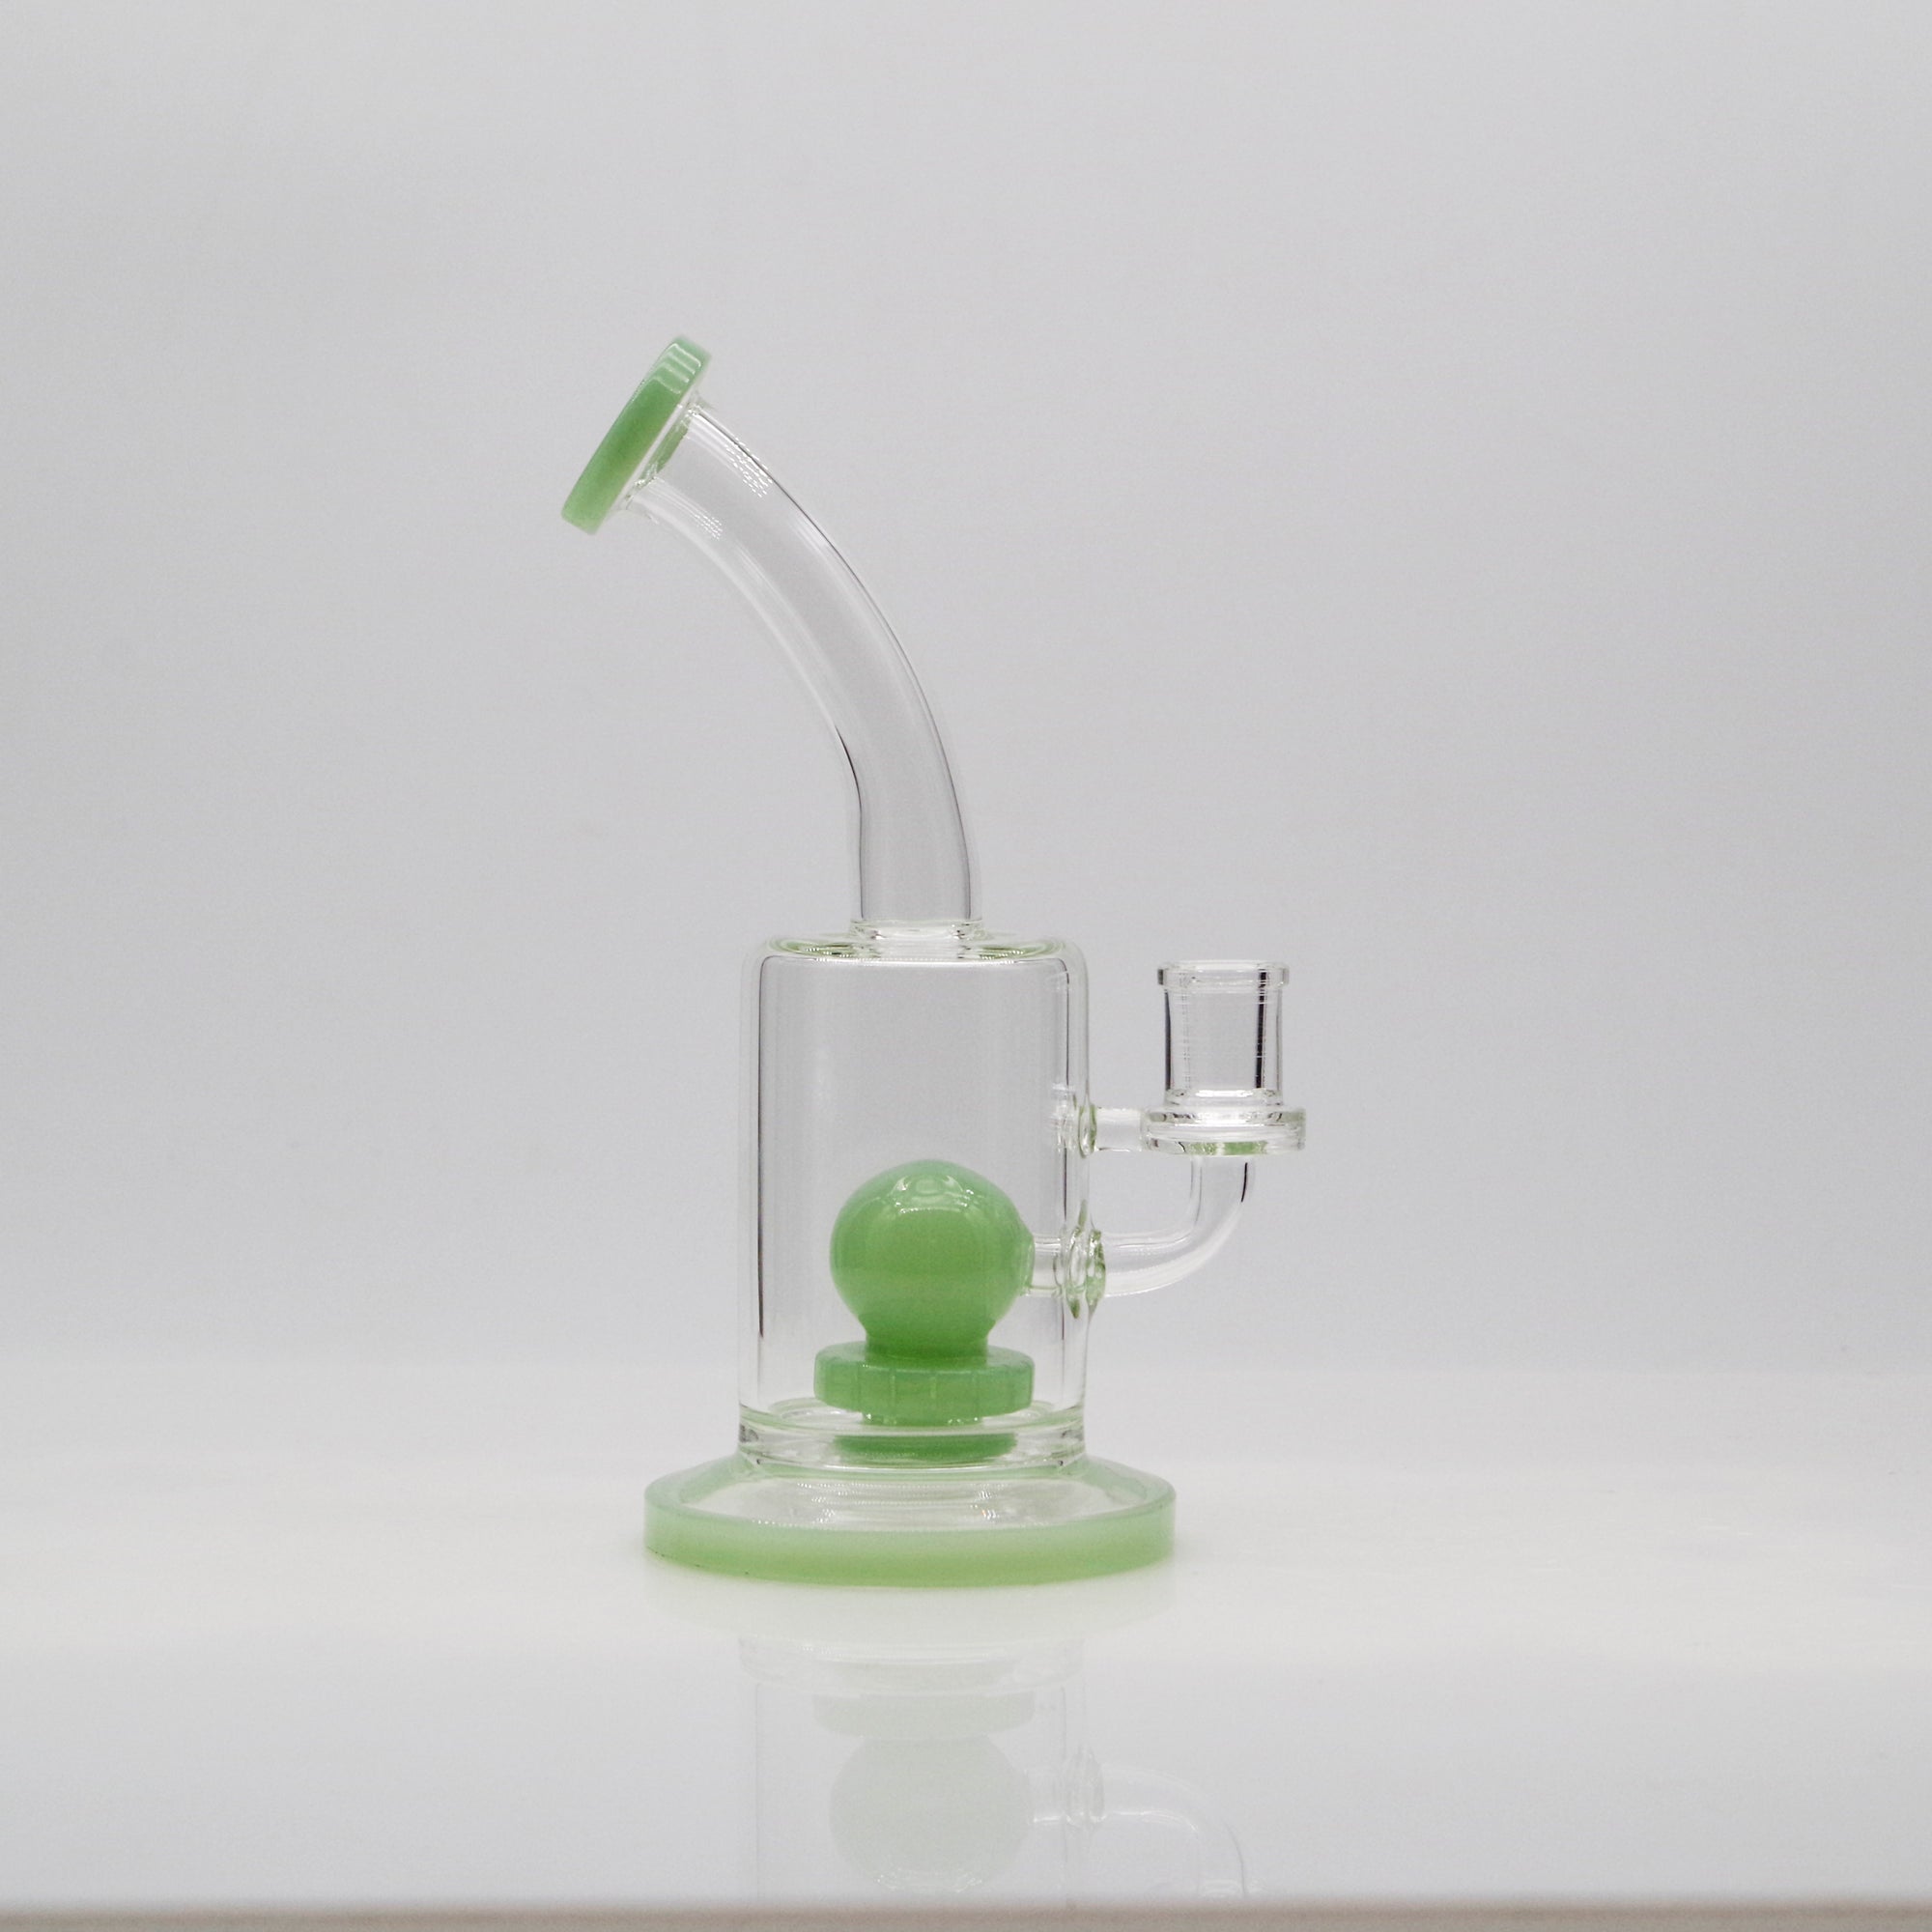 Banger Hanger with Internal Ball and Perc (Online Only) - Smoke